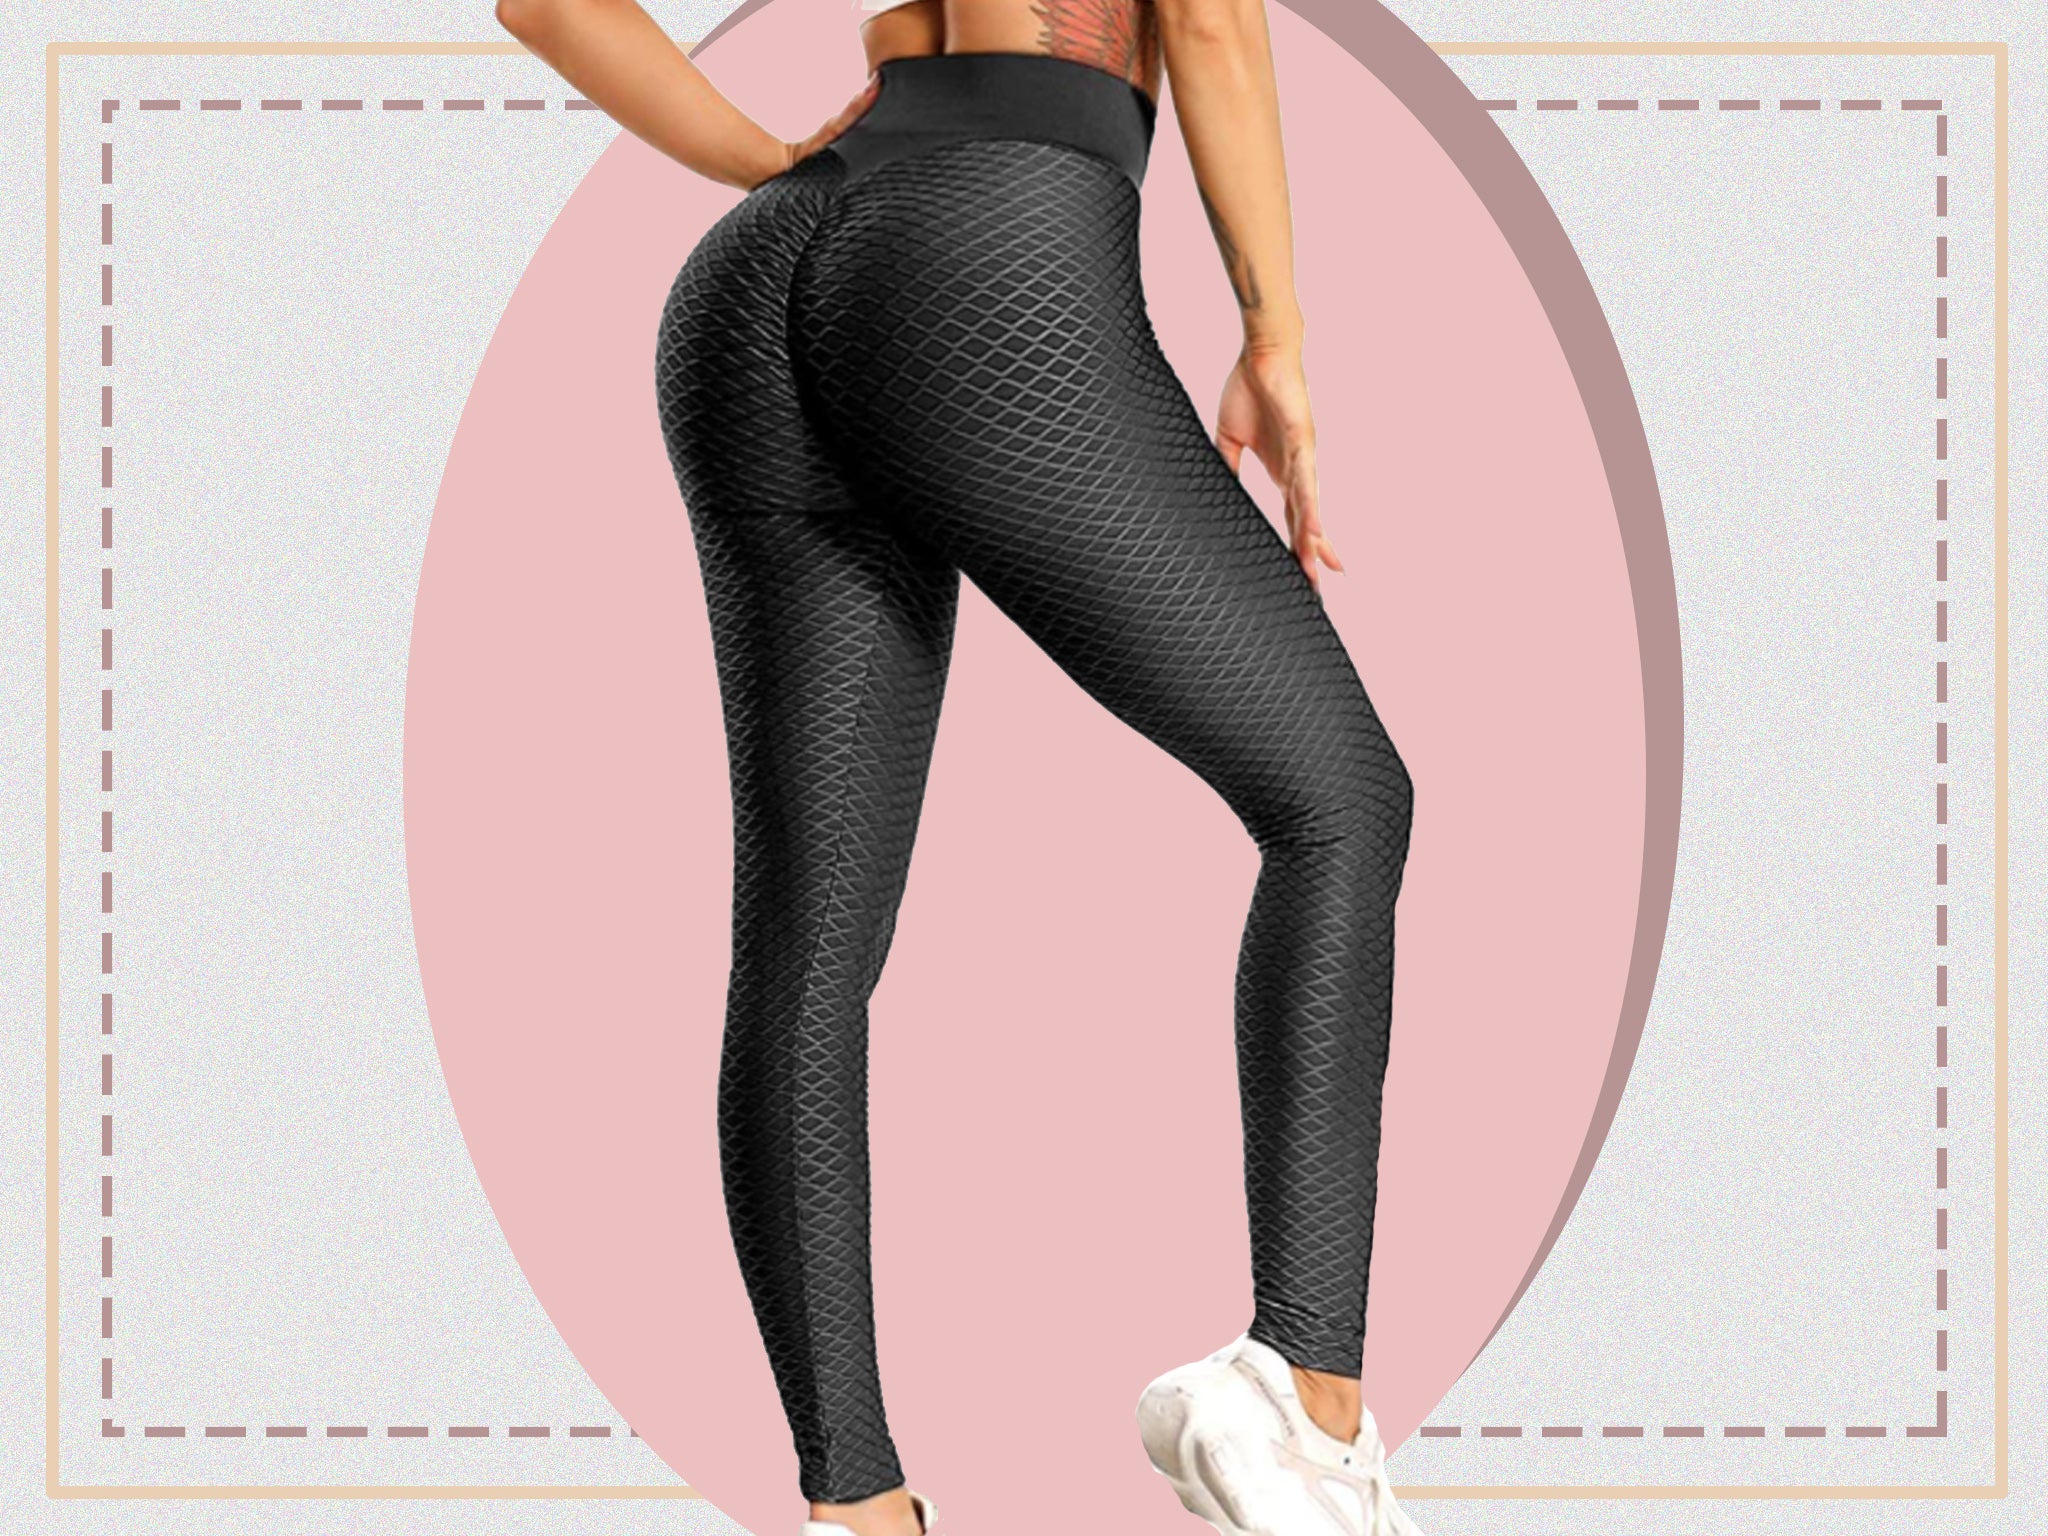 These bum enhancing leggings have gone viral on Tiktok, but do they work?